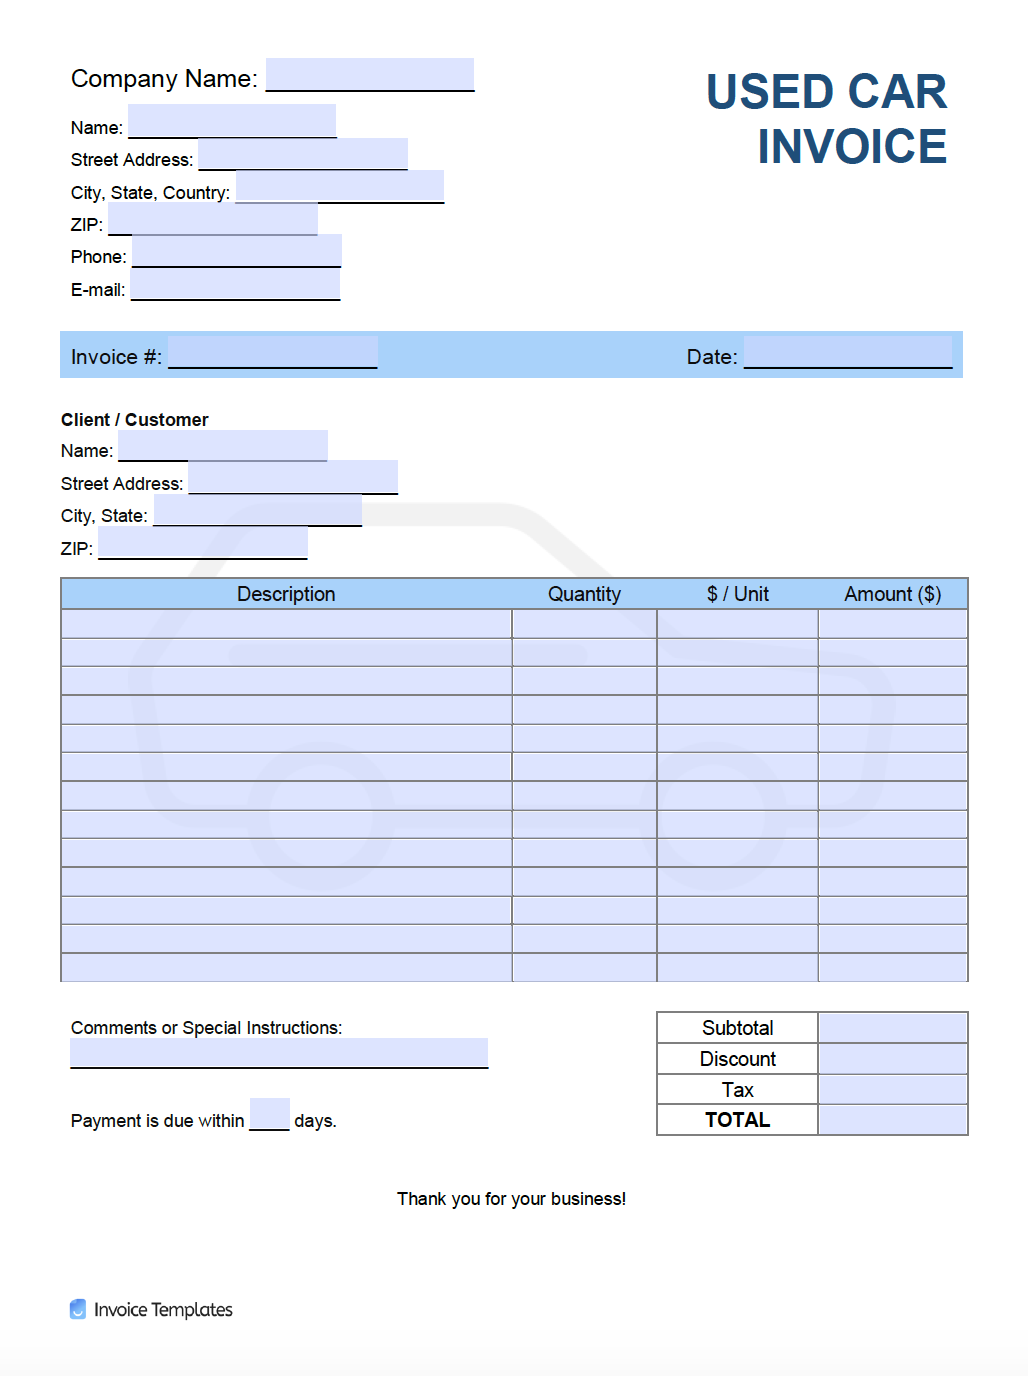 Free Used Car Invoice Template  PDF  WORD  EXCEL Inside Car Sales Invoice Template Free Download